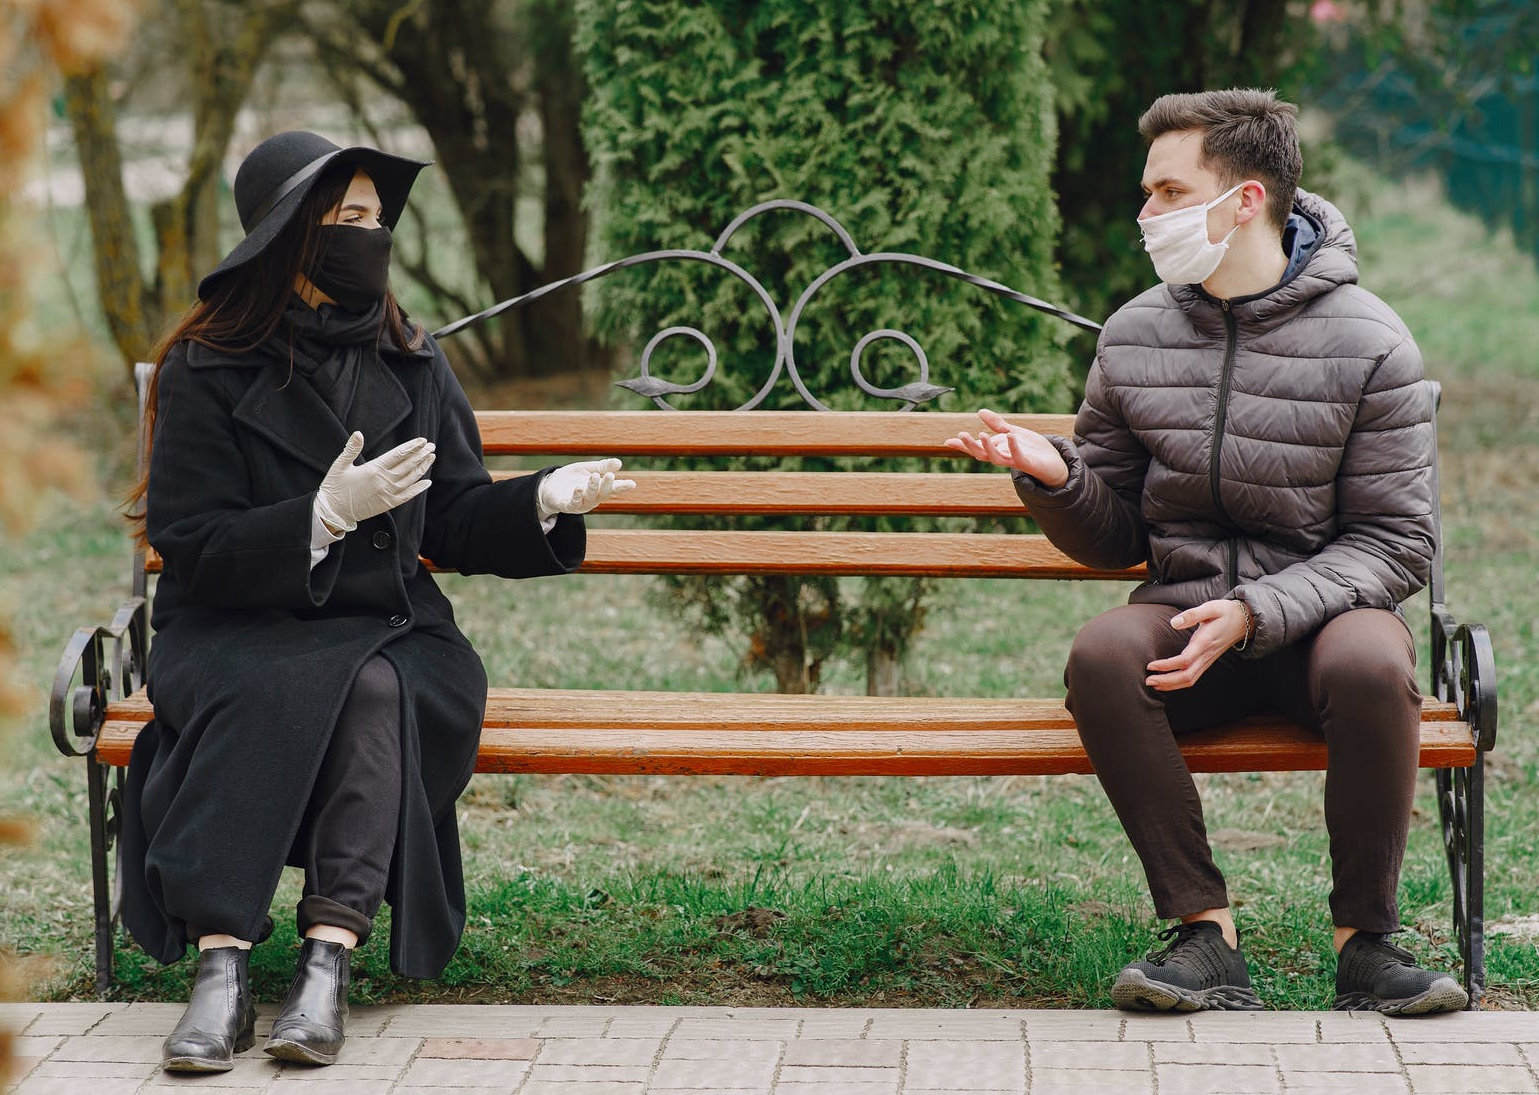 Two people sitting on bench wearing masks and social distancing